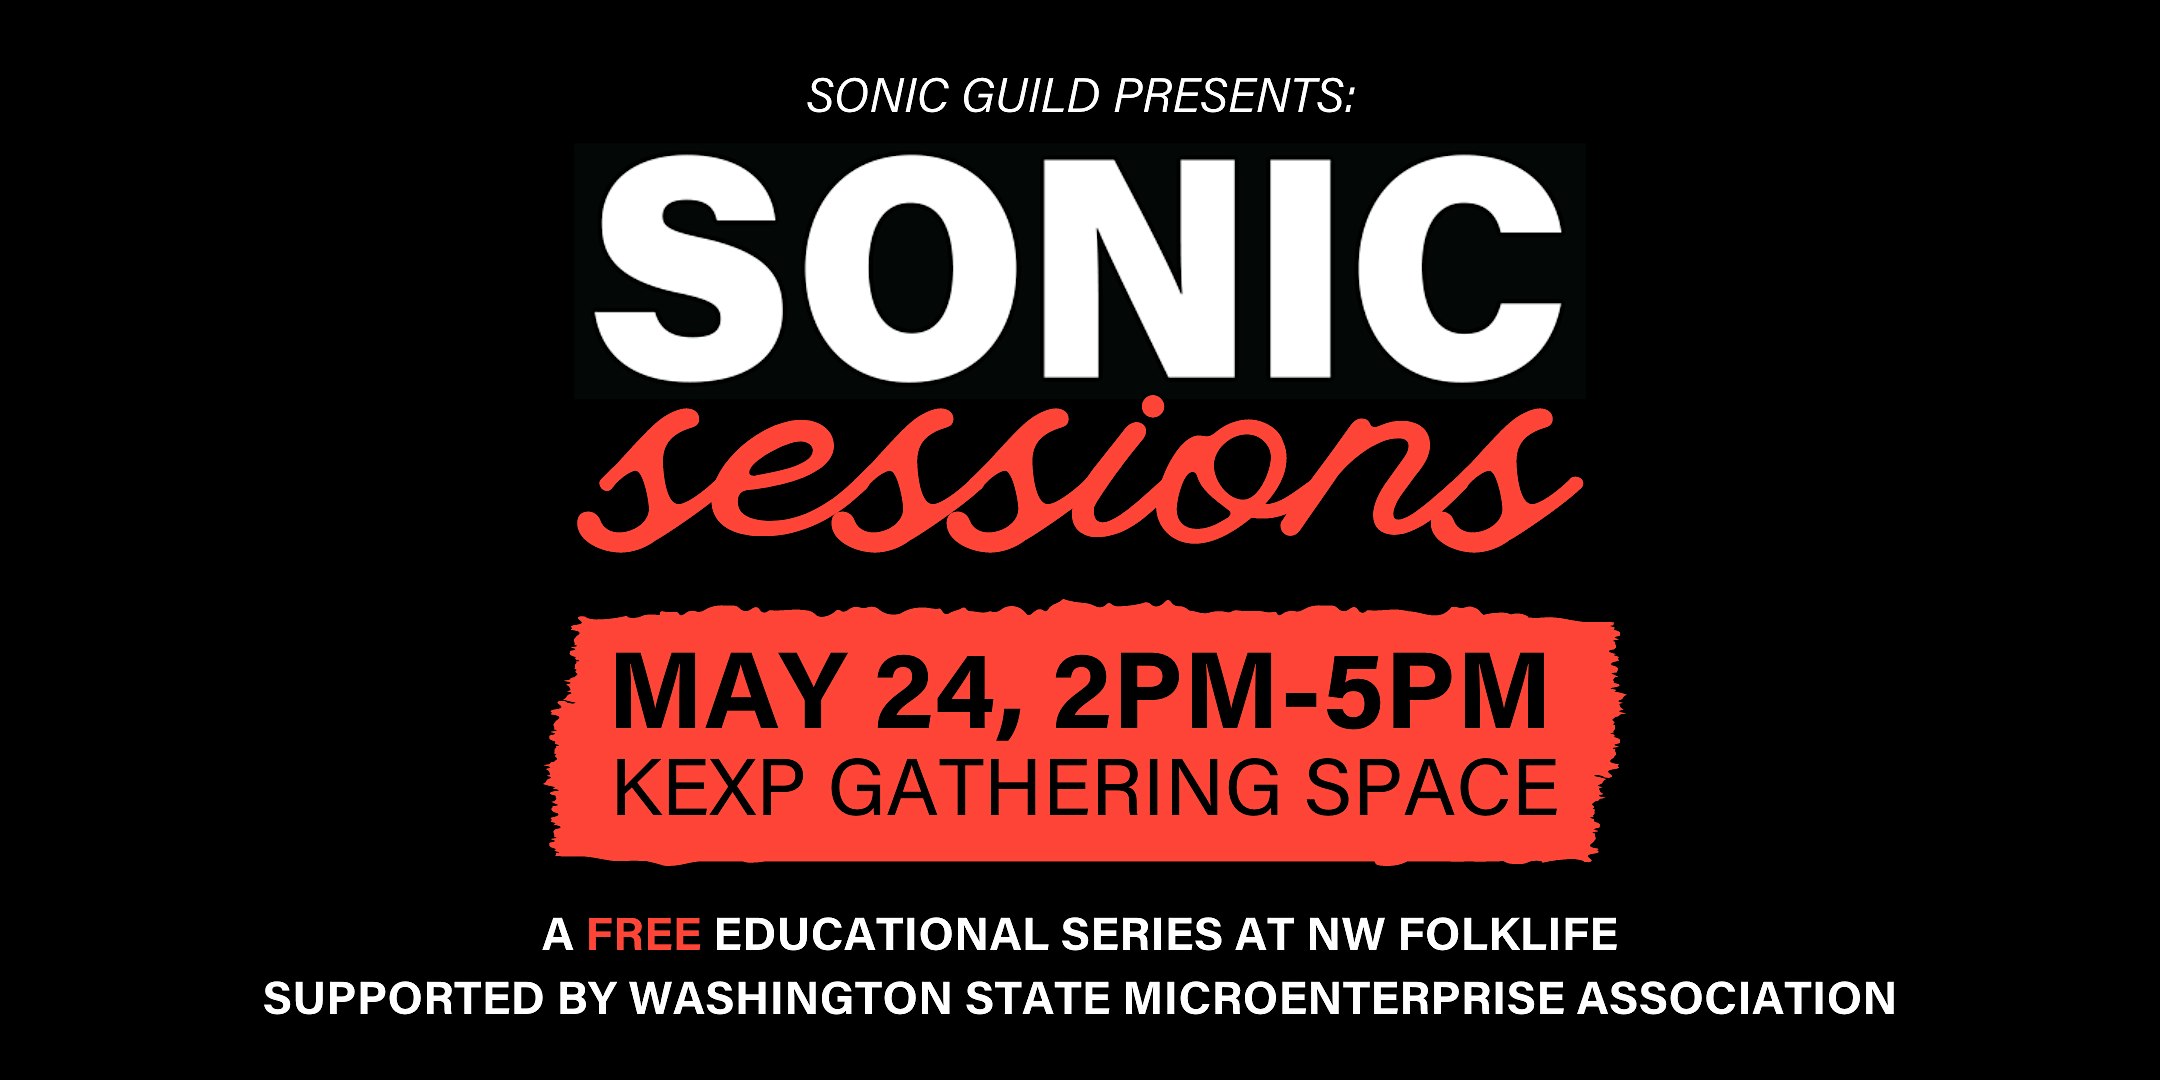 Sonic Sessions at NW Folklife's Laulima: Creative Ecosystems Summit